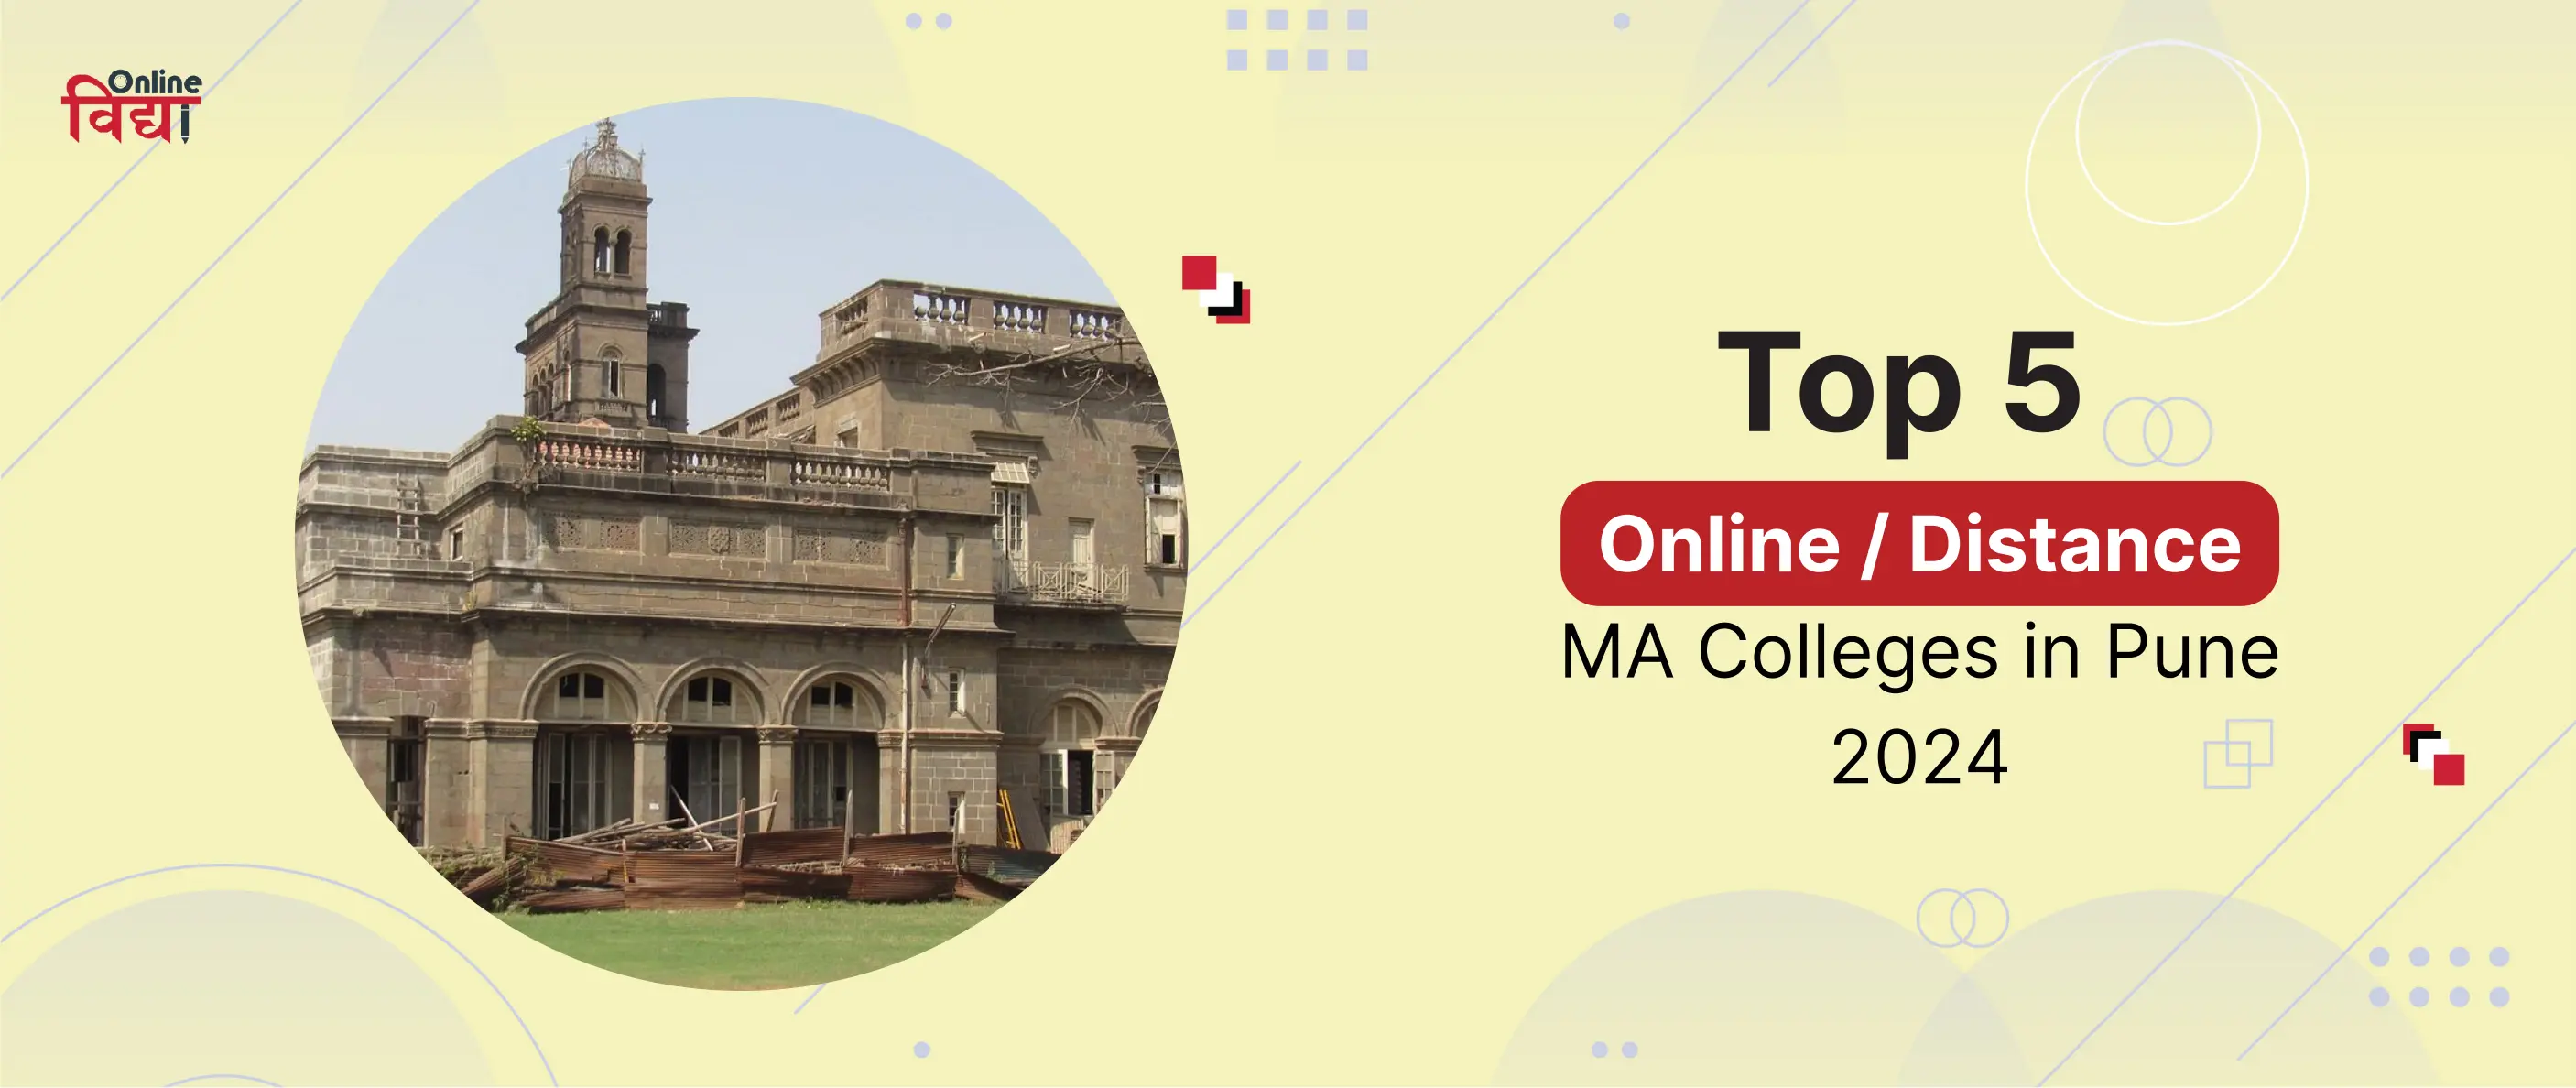 Top 5 Online/Distance MA Colleges in Pune 2024